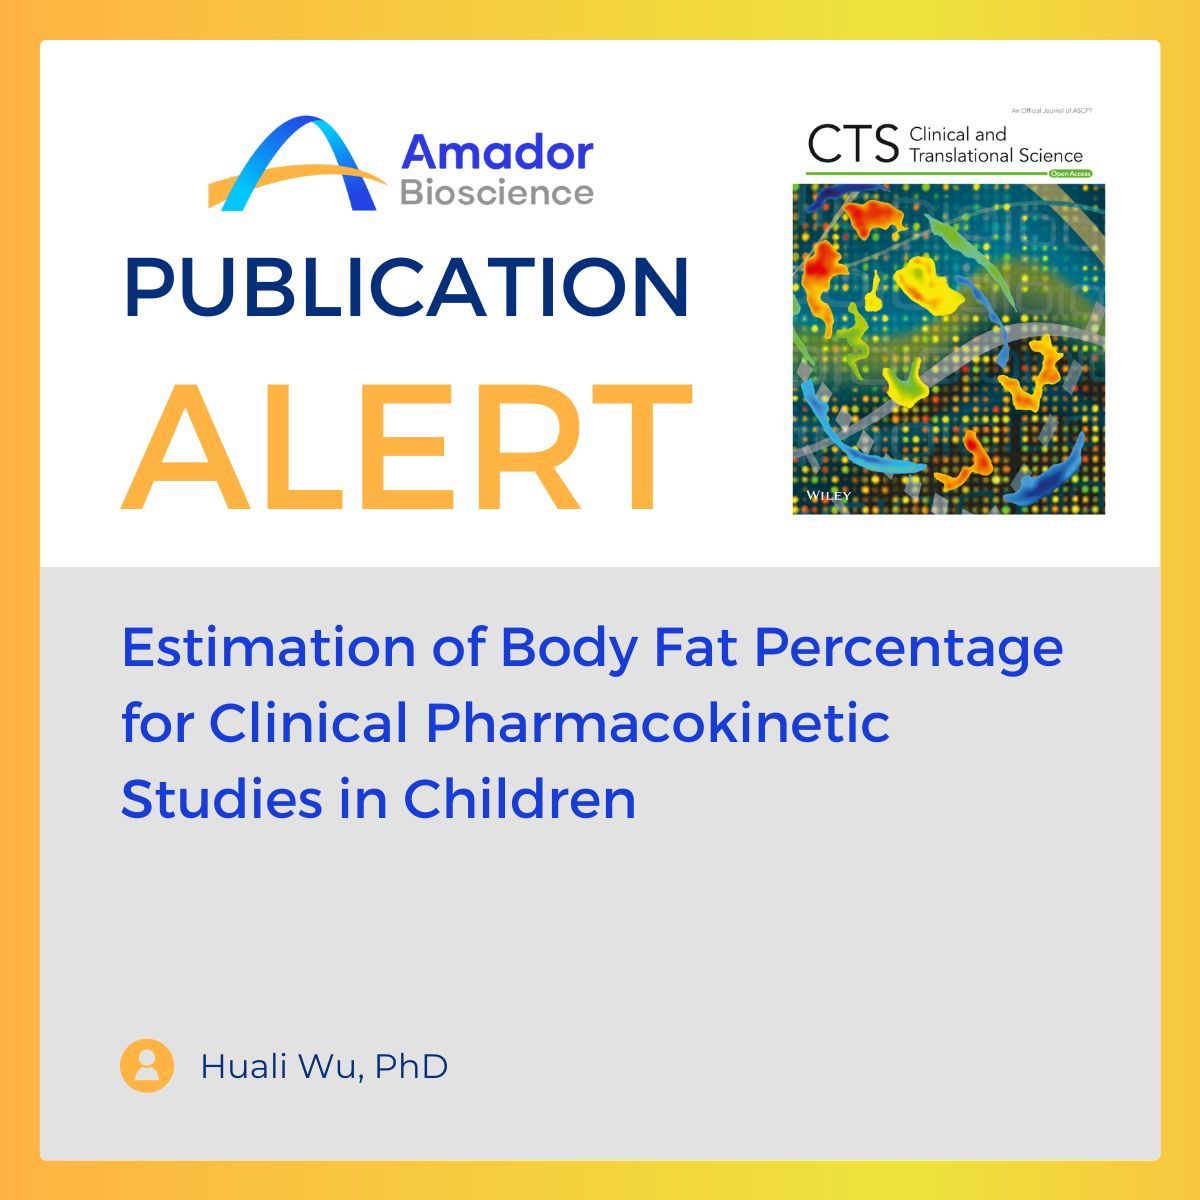 Estimation of Body Fat Percentagefor Clinical Pharmacokinetic Studies in Children